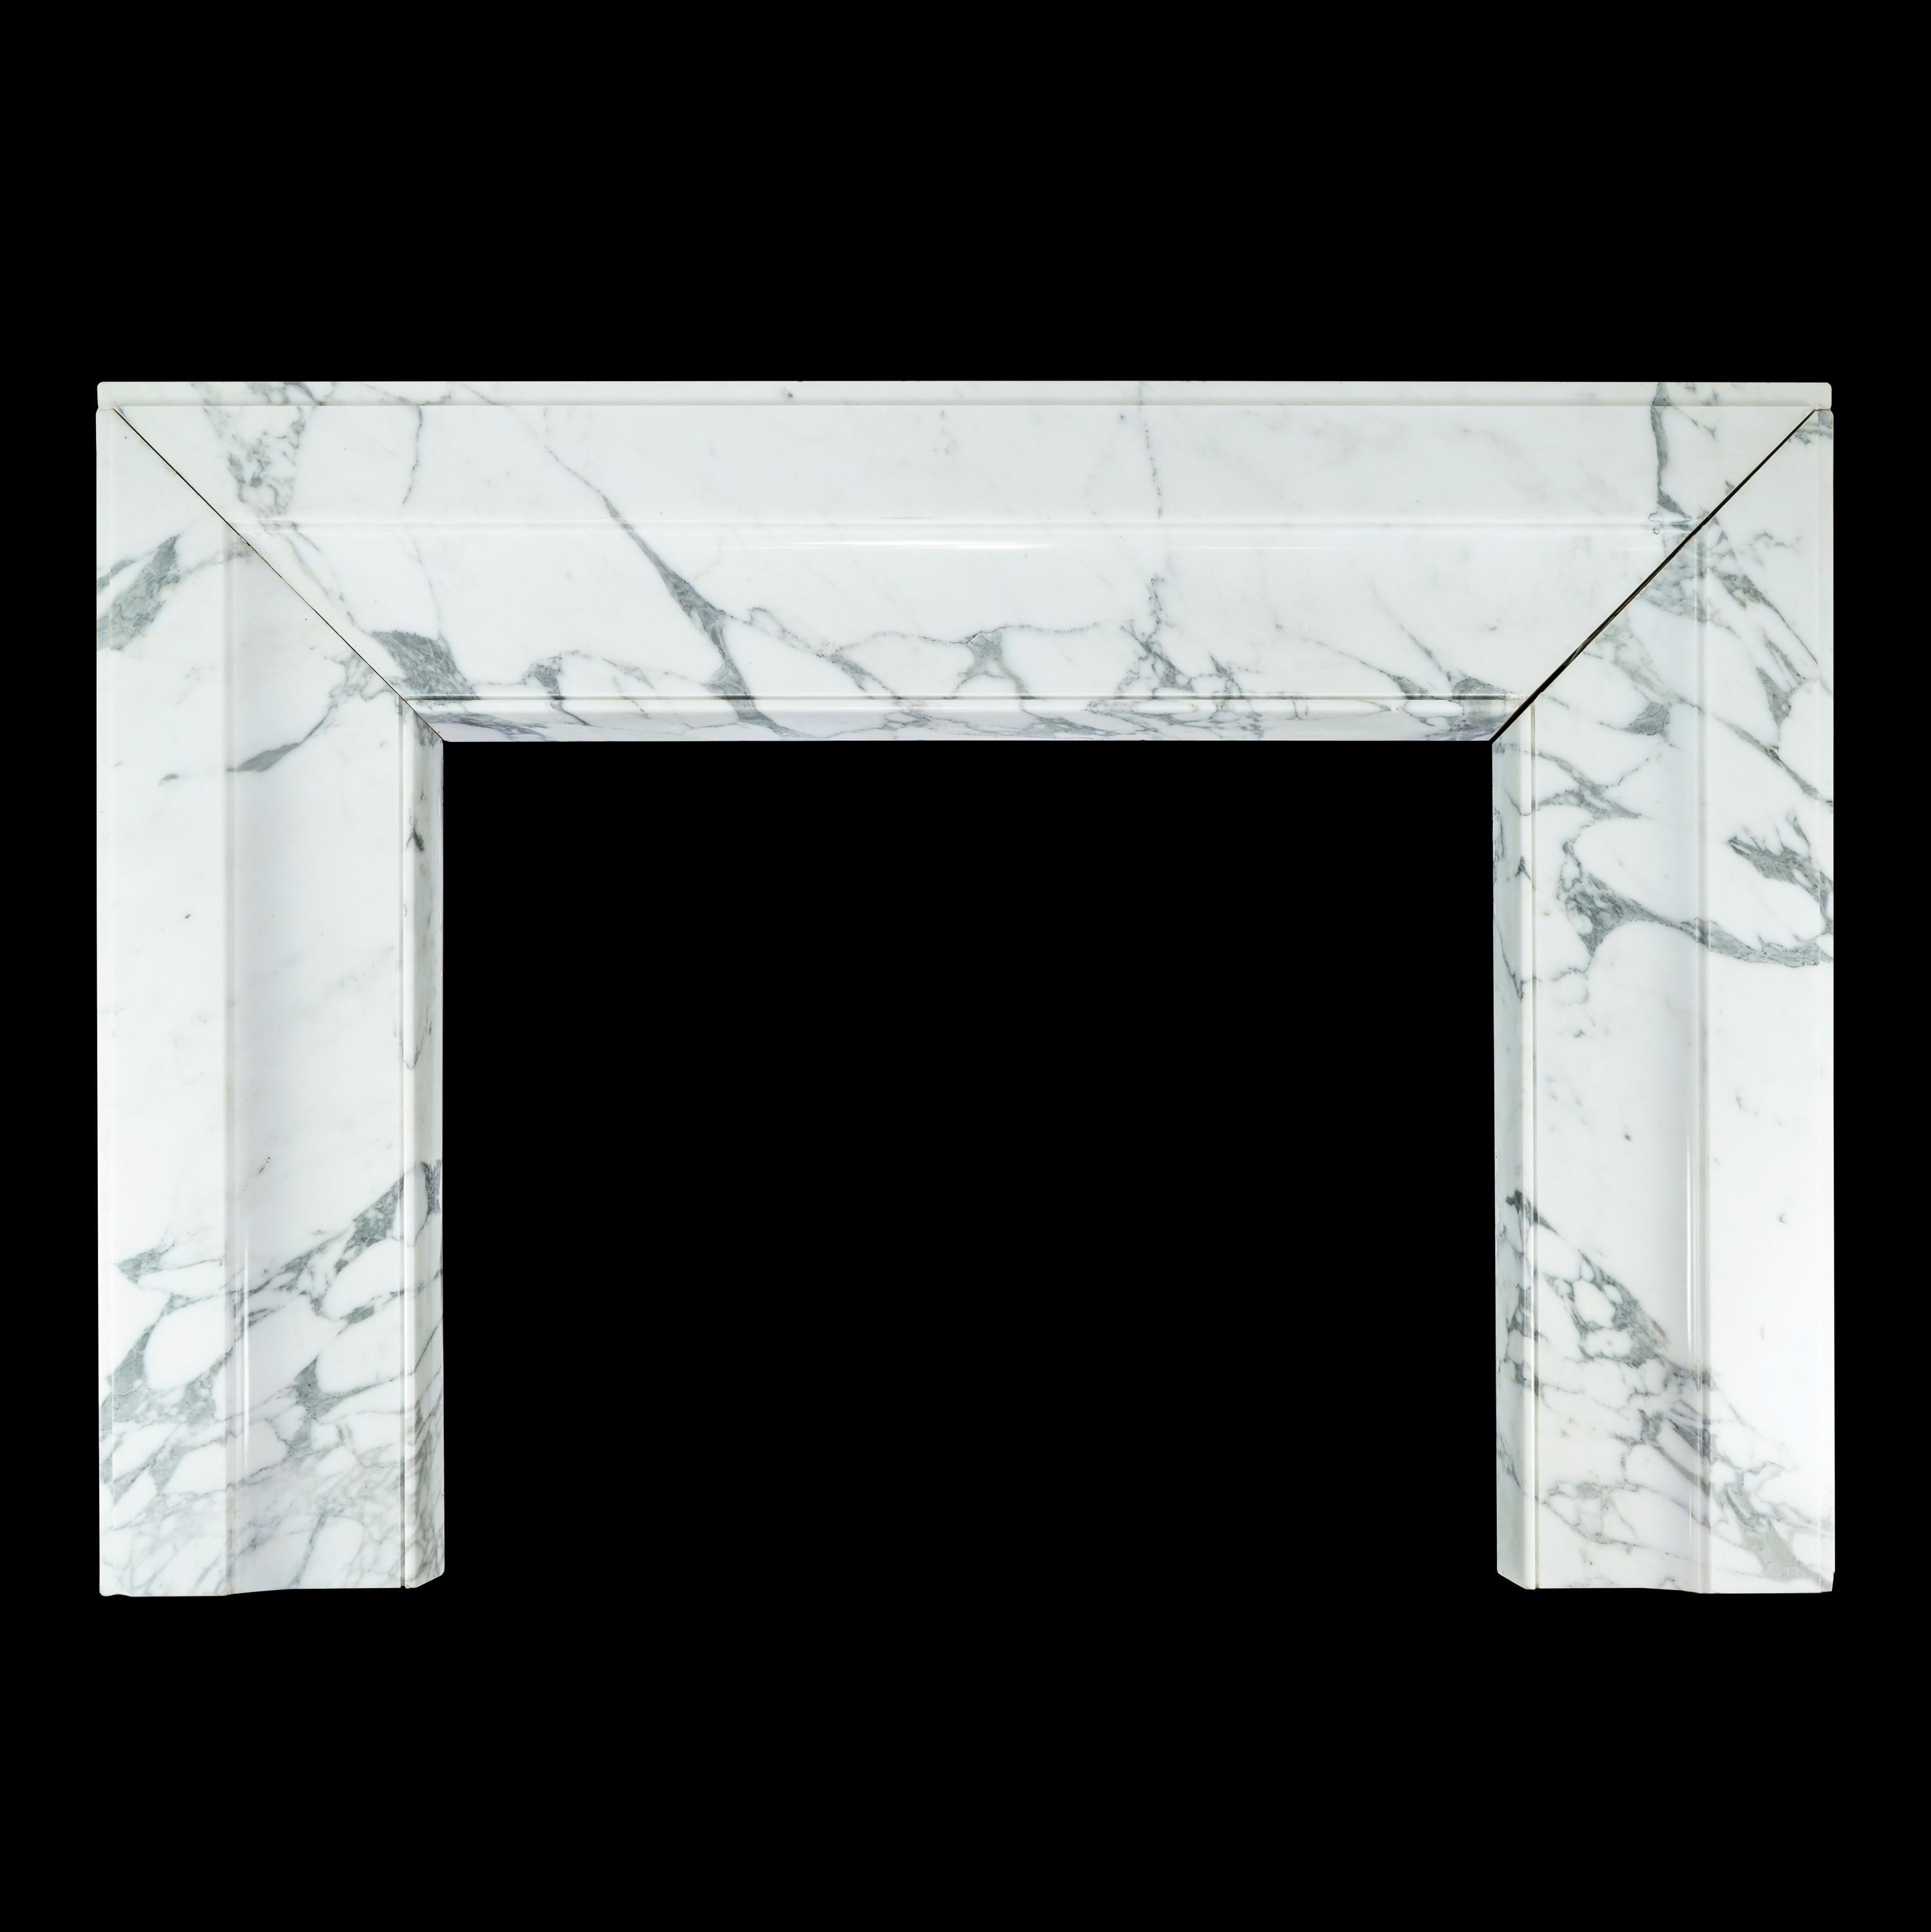 This 20th century Bolection style influenced fireplace mantel consists of three solid blocks of gray veined white marble. Features gentle curves and simple lines. The top of the surround is six inches deep and is a flat surface that can therefore